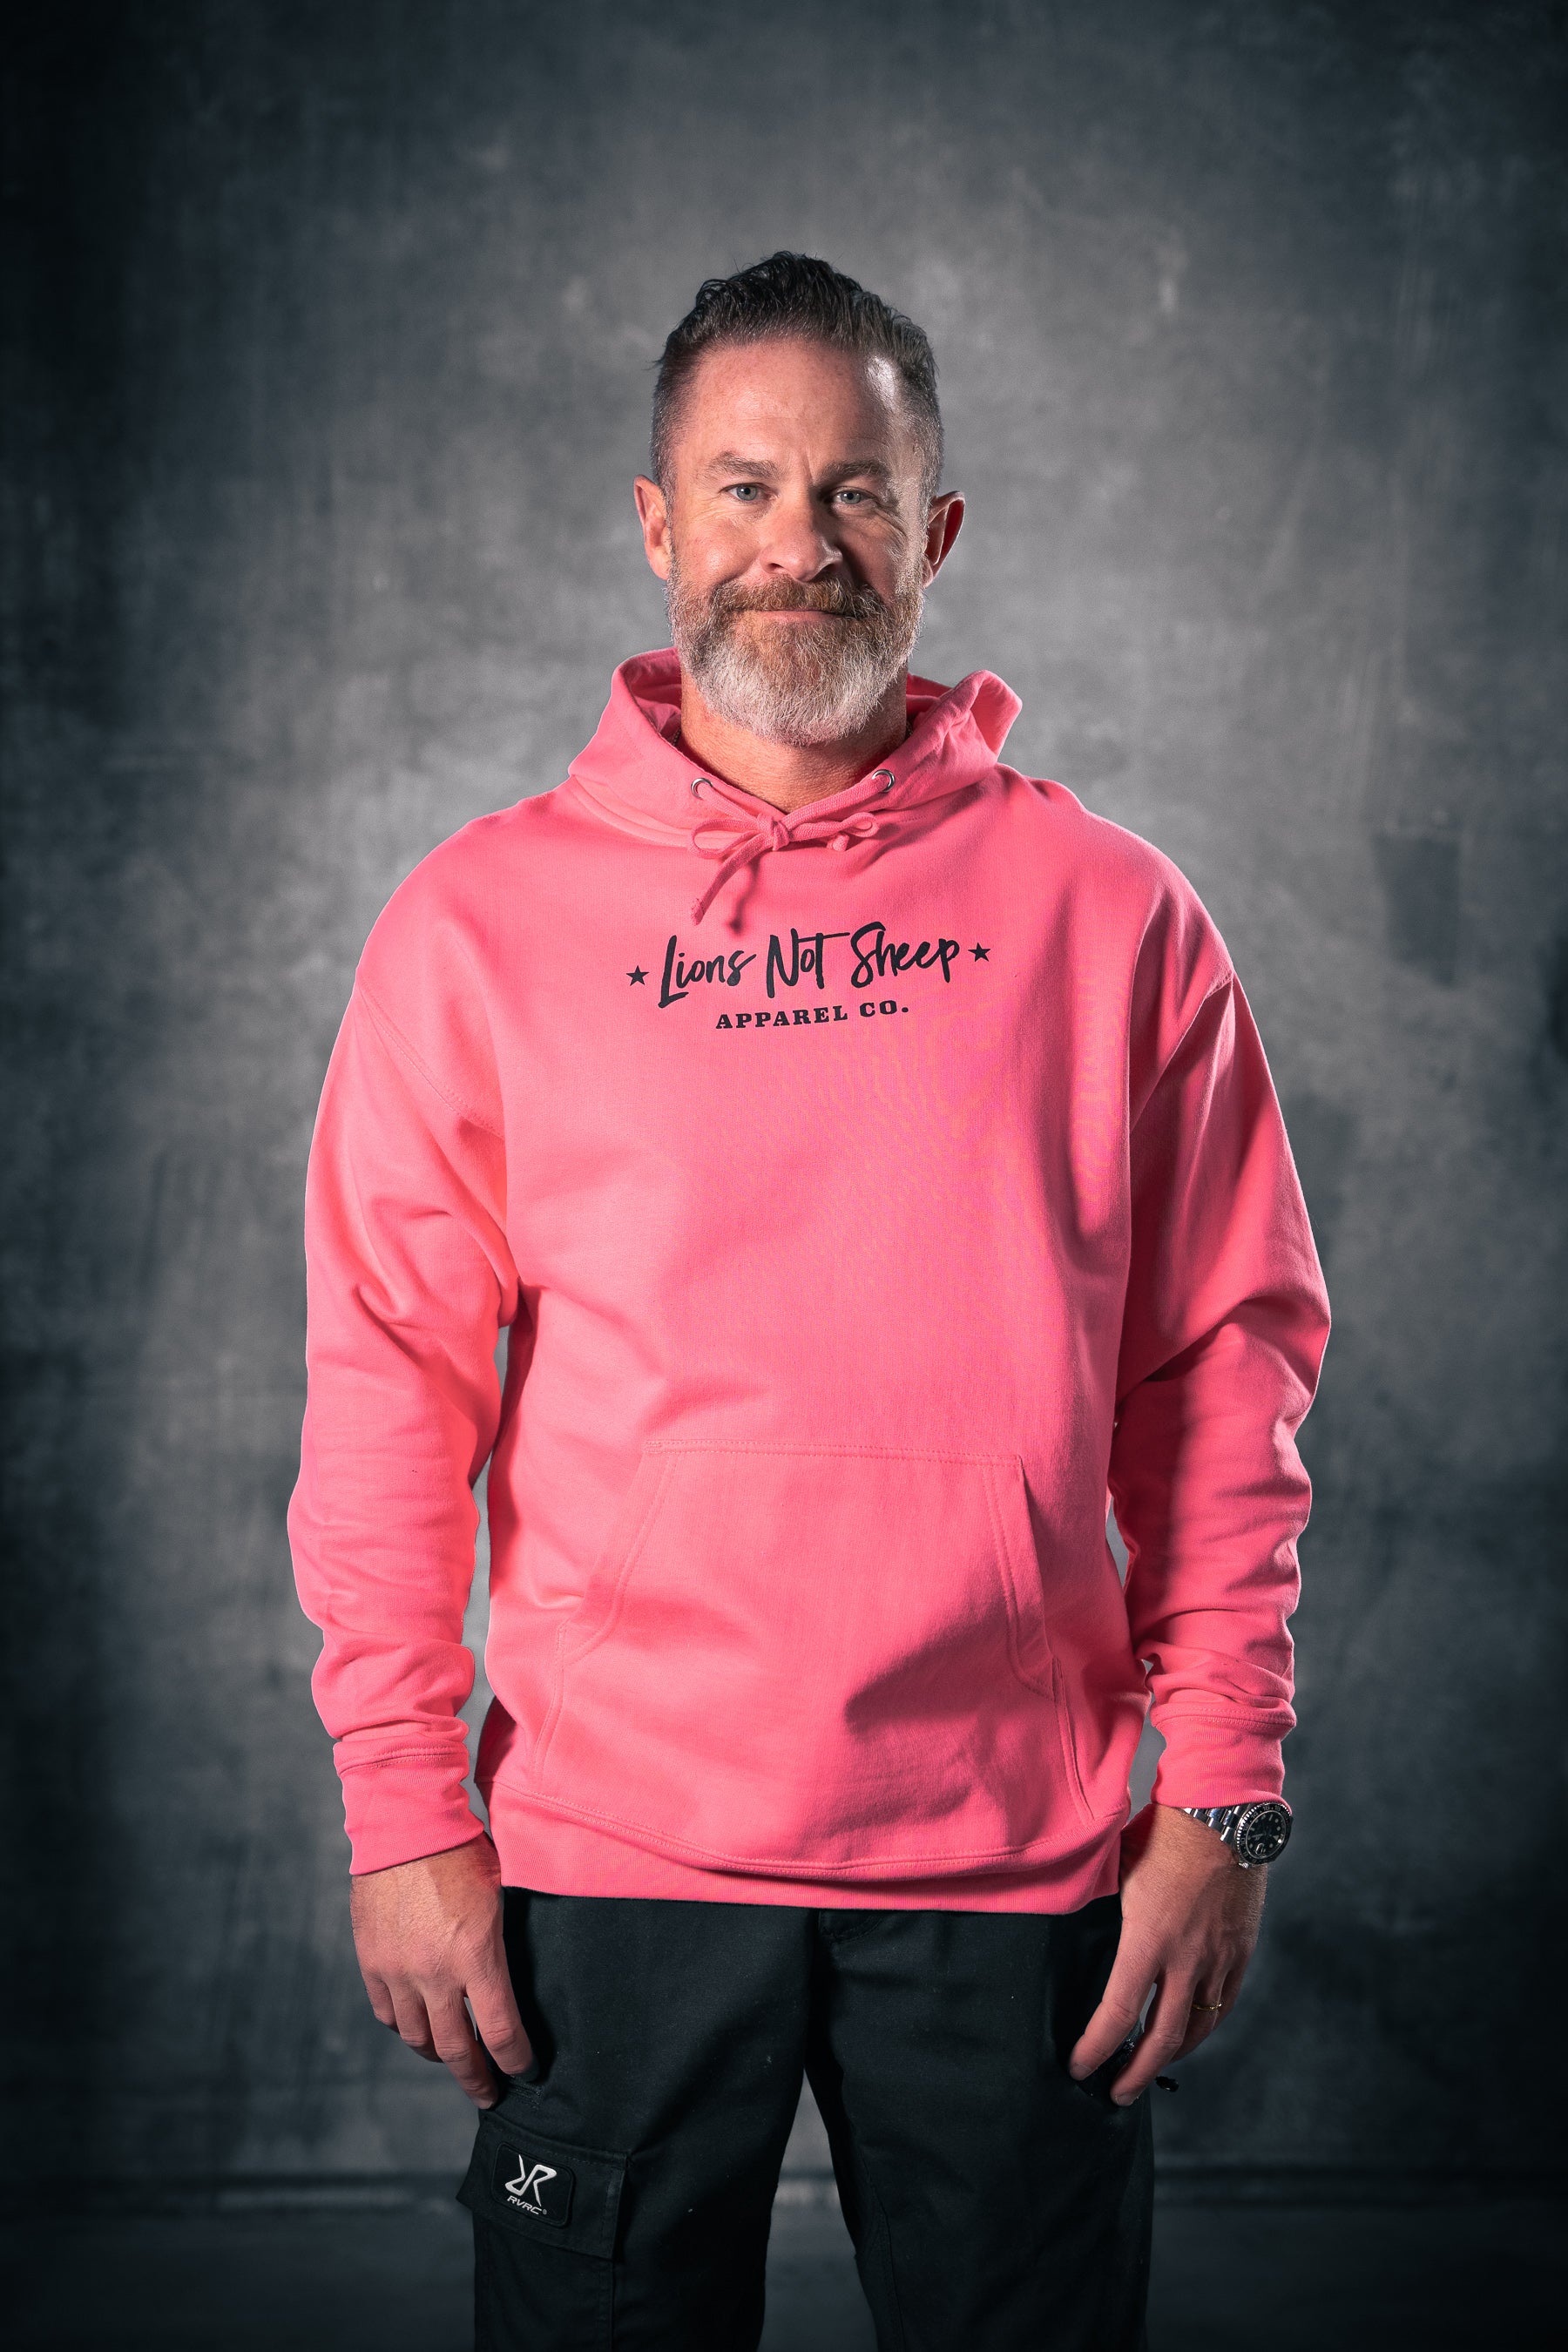 Lions Not Sheep "Apparel Co." Unisex Pullover Hoodie (Pink) - Lions Not Sheep ®